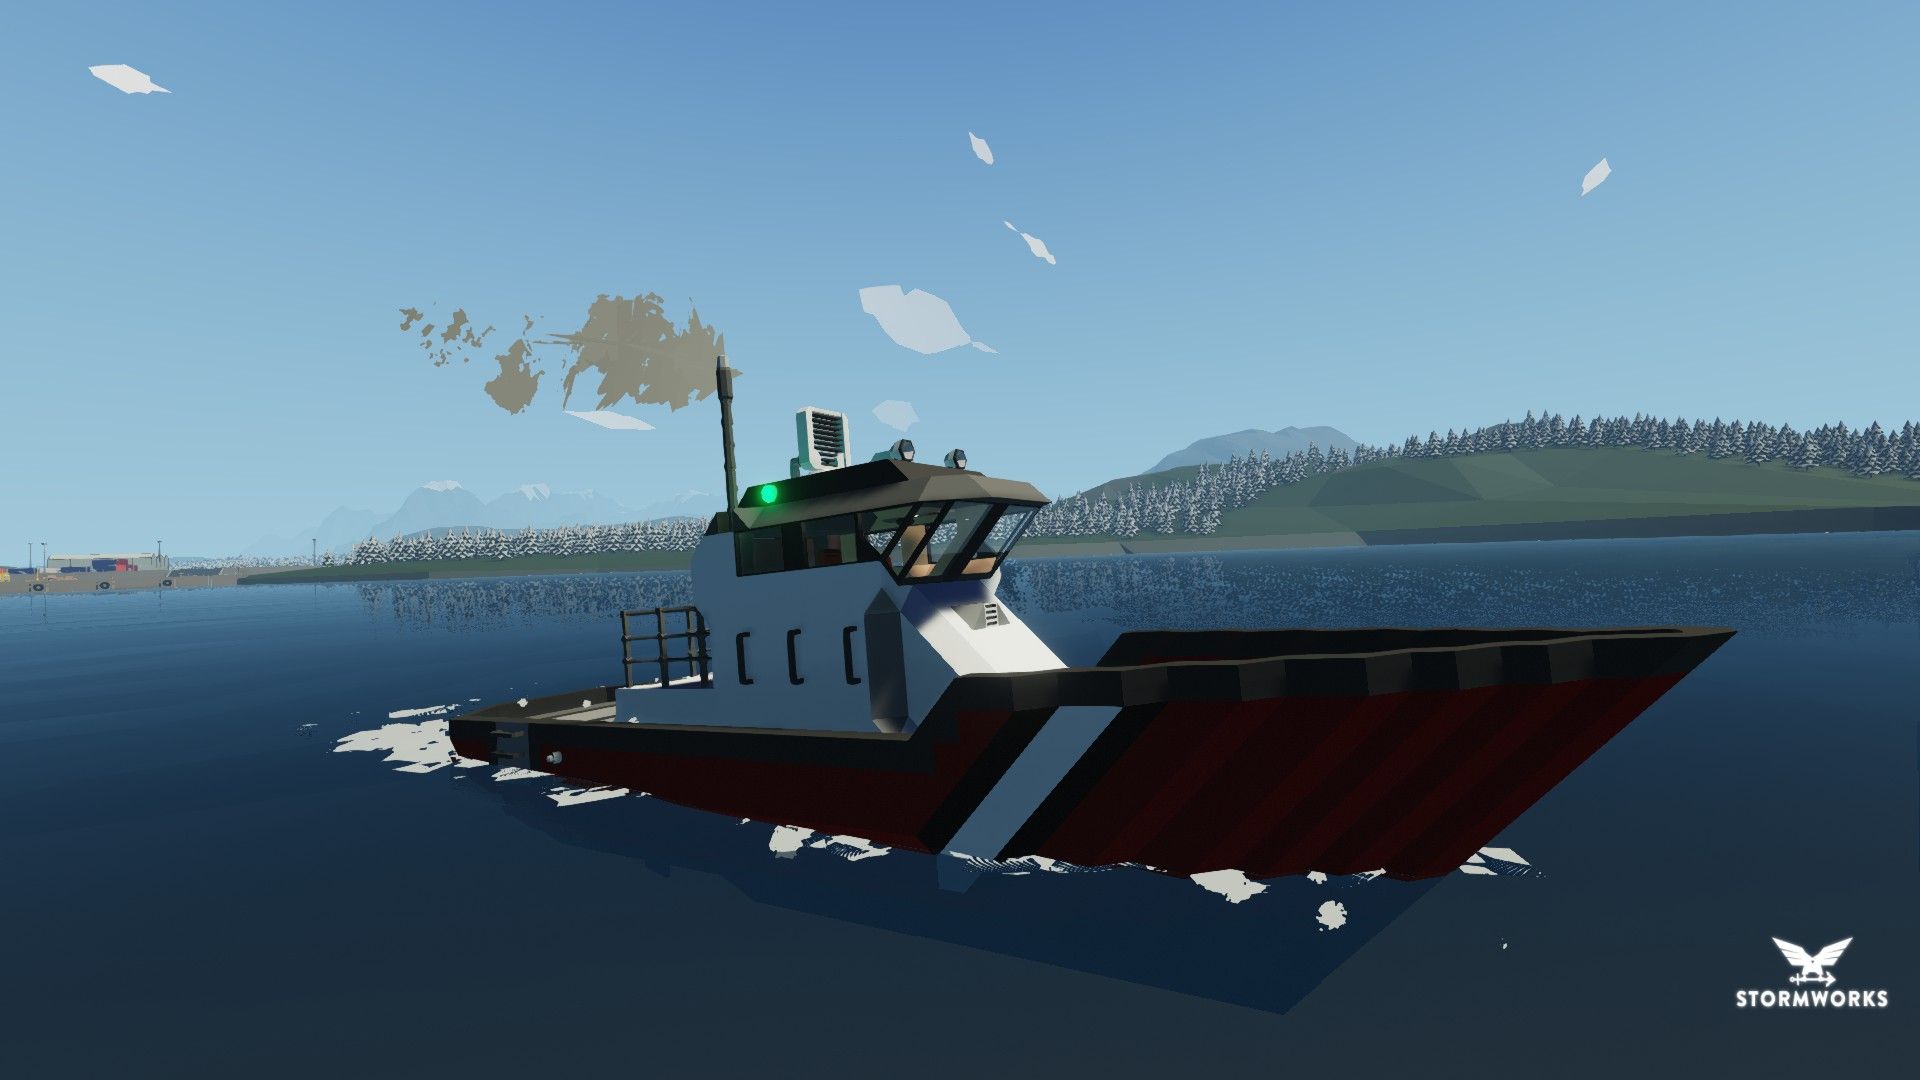 Just Discovered And Picked Up Stormworks On Monday And Am Having An Absolute Blast Using The Editor! After 28 Hours Ish Of Work I Just Finished My First Boat, The Salish Scout